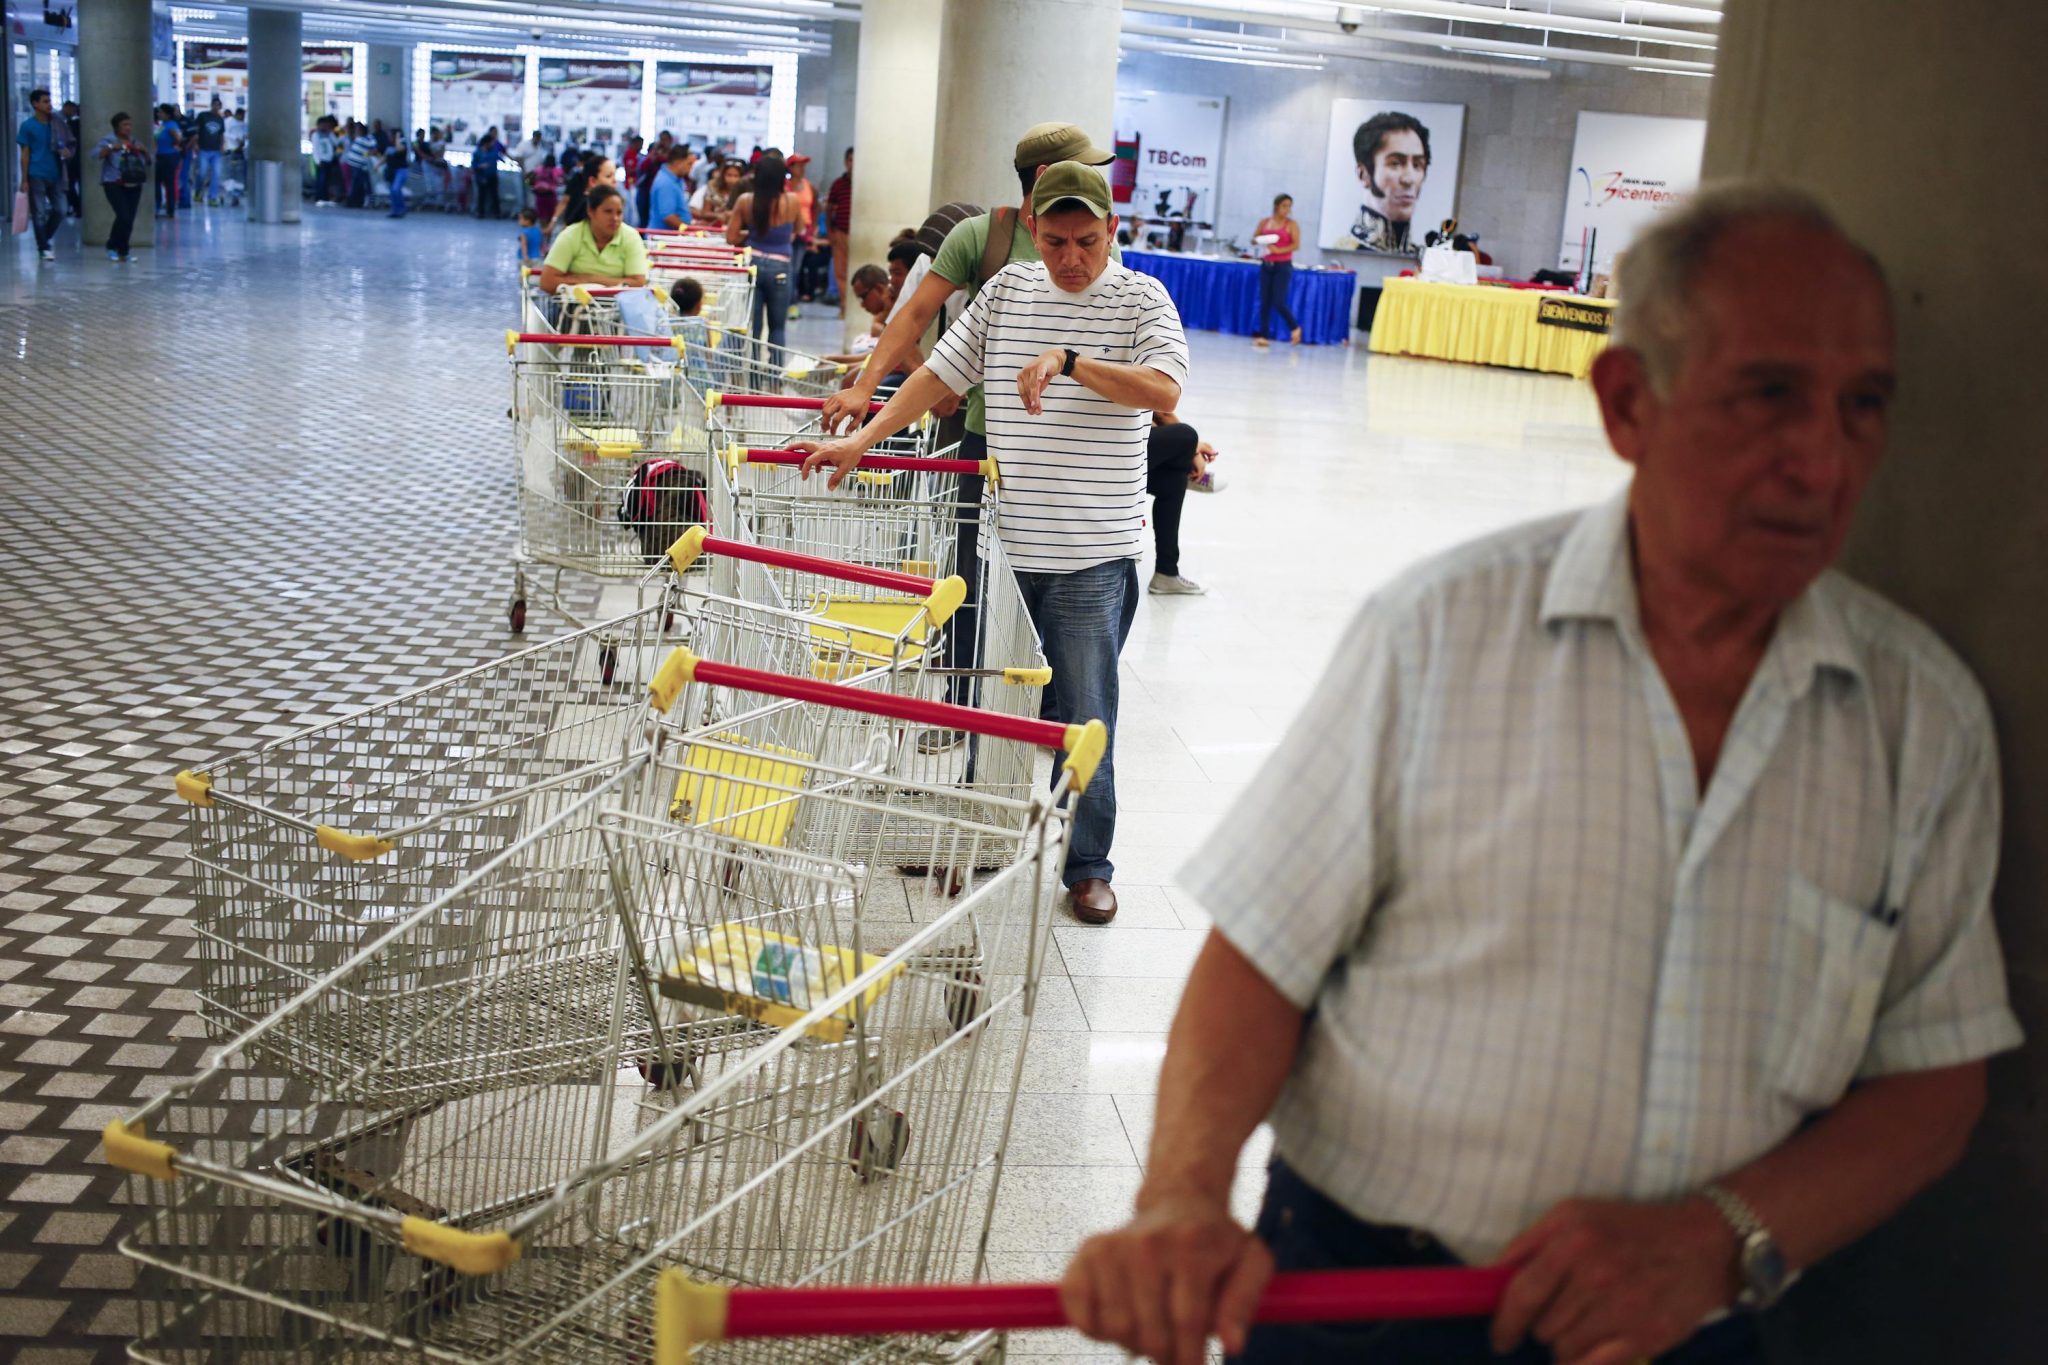 Customers line up to get in for shopping at a state-run Bicentenario supermarket in Caracas May 2, 2014.  President Nicolas Maduro is introducing a controversial shopping card intended to combat Venezuela's food shortages but decried by critics as a Cuban-style policy illustrating the failure of his socialist policies. Maduro, the 51-year-old successor to Hugo Chavez, trumpets the new "Secure Food Supply" card, which will set limits on purchases, as a way to stop unscrupulous shoppers stocking up on subsidized groceries and reselling them. REUTERS/Jorge Silva (VENEZUELA - Tags: POLITICS BUSINESS SOCIETY TPX IMAGES OF THE DAY)